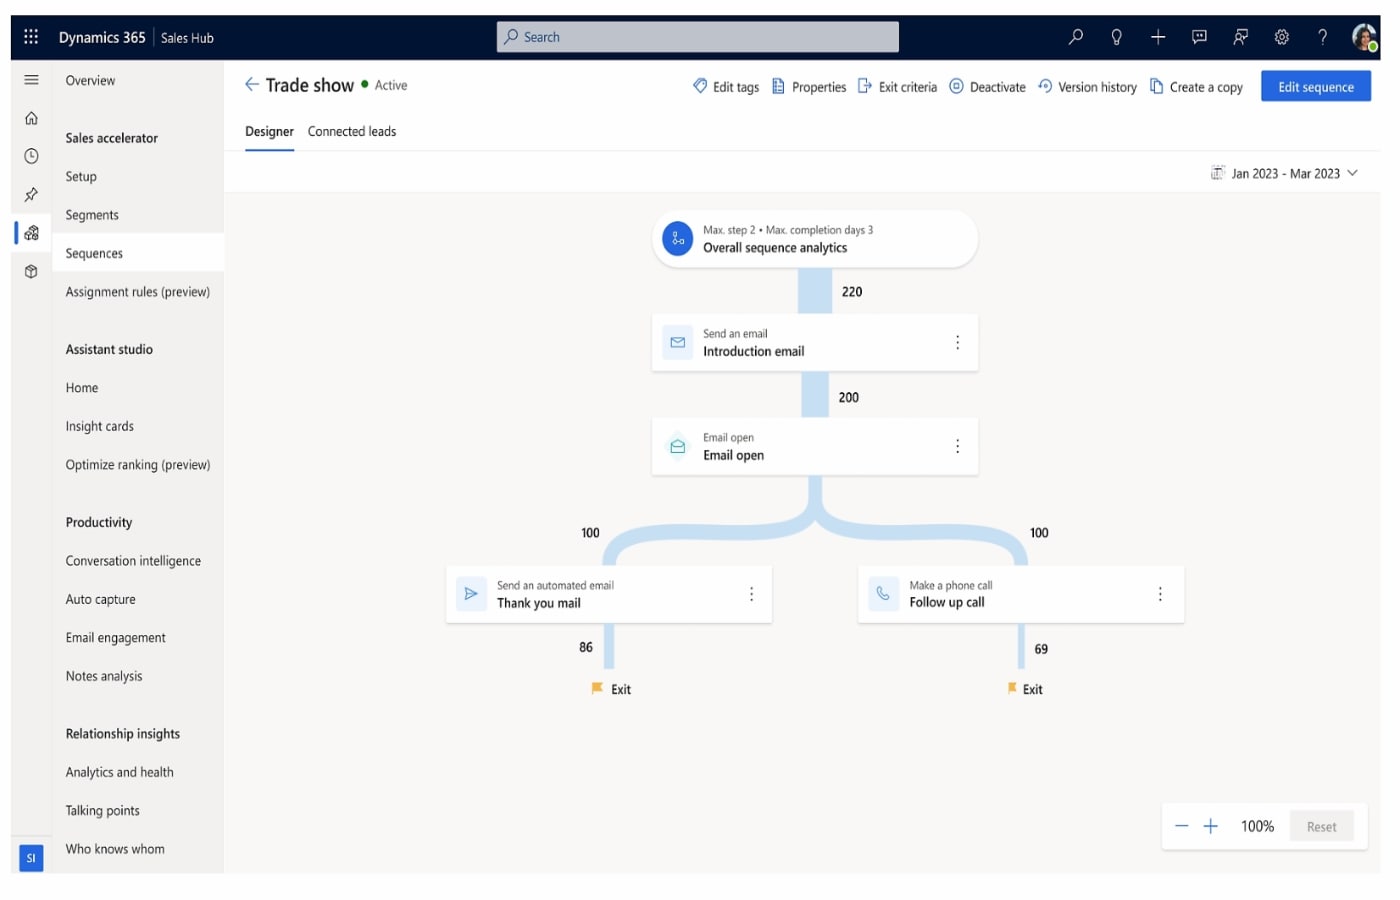 Example sales sequence in Dynamics 365 Sales.